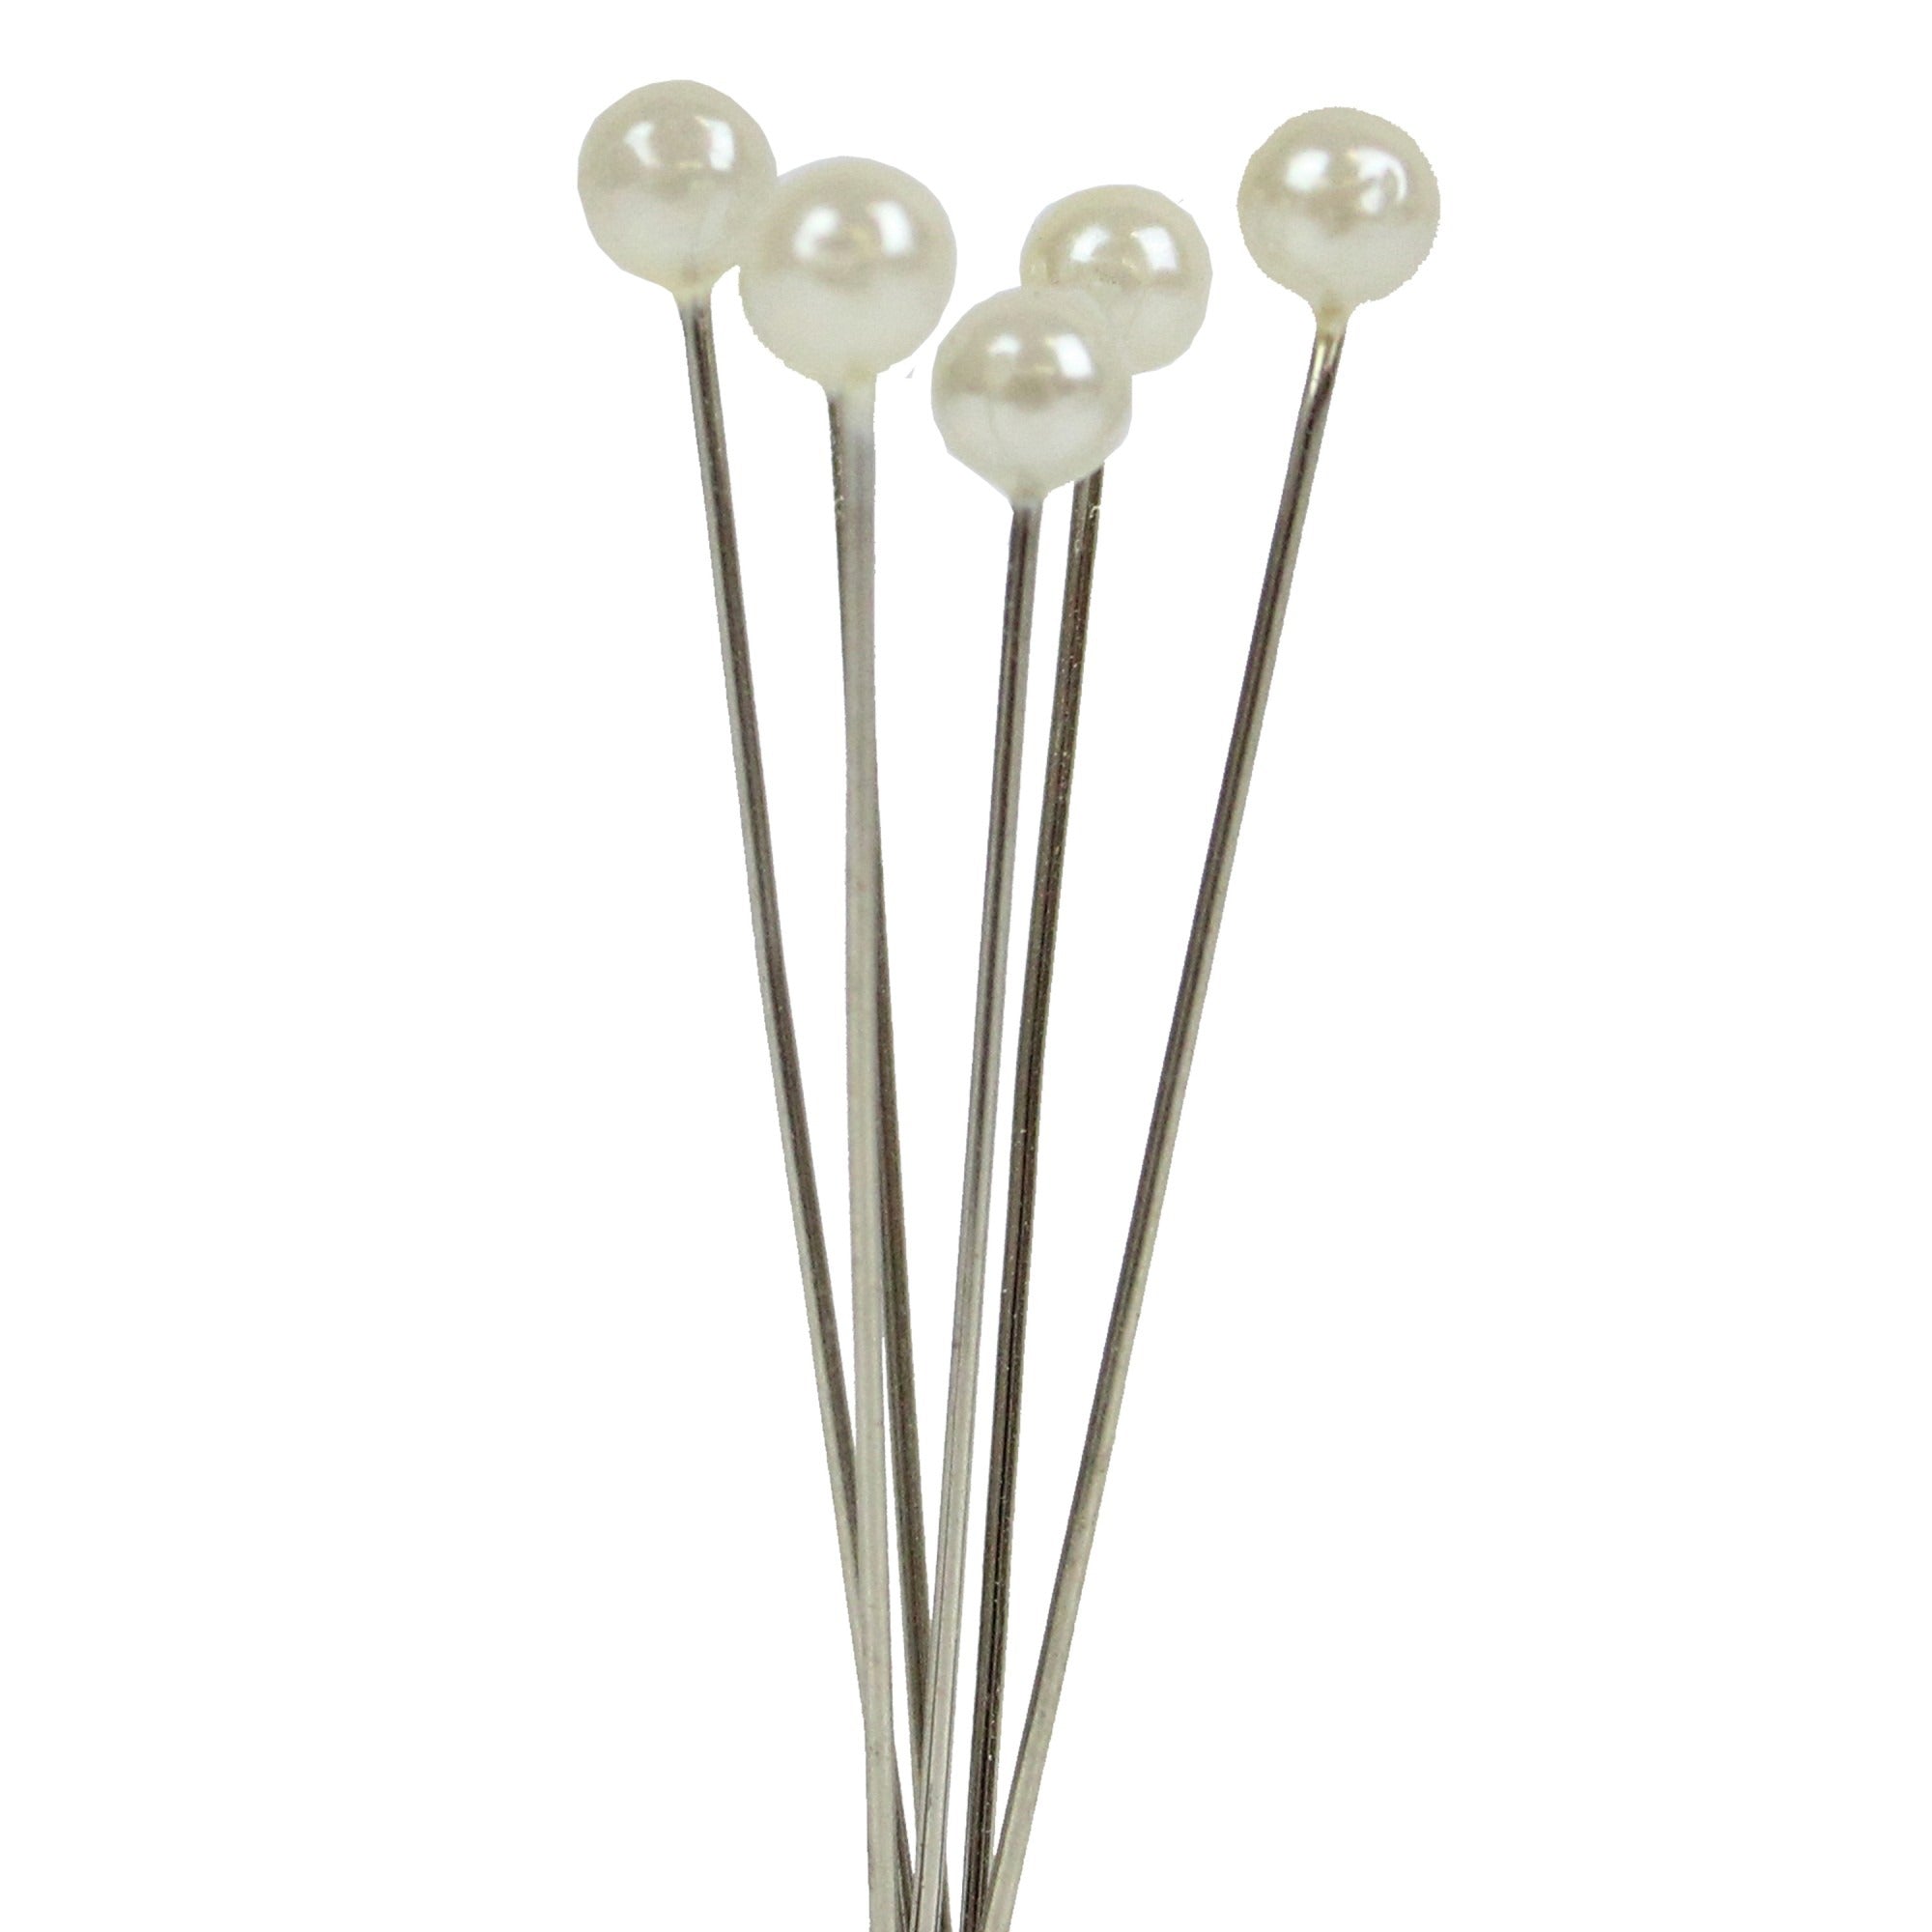 View Ivory 4cm Pearl Headed Pins information